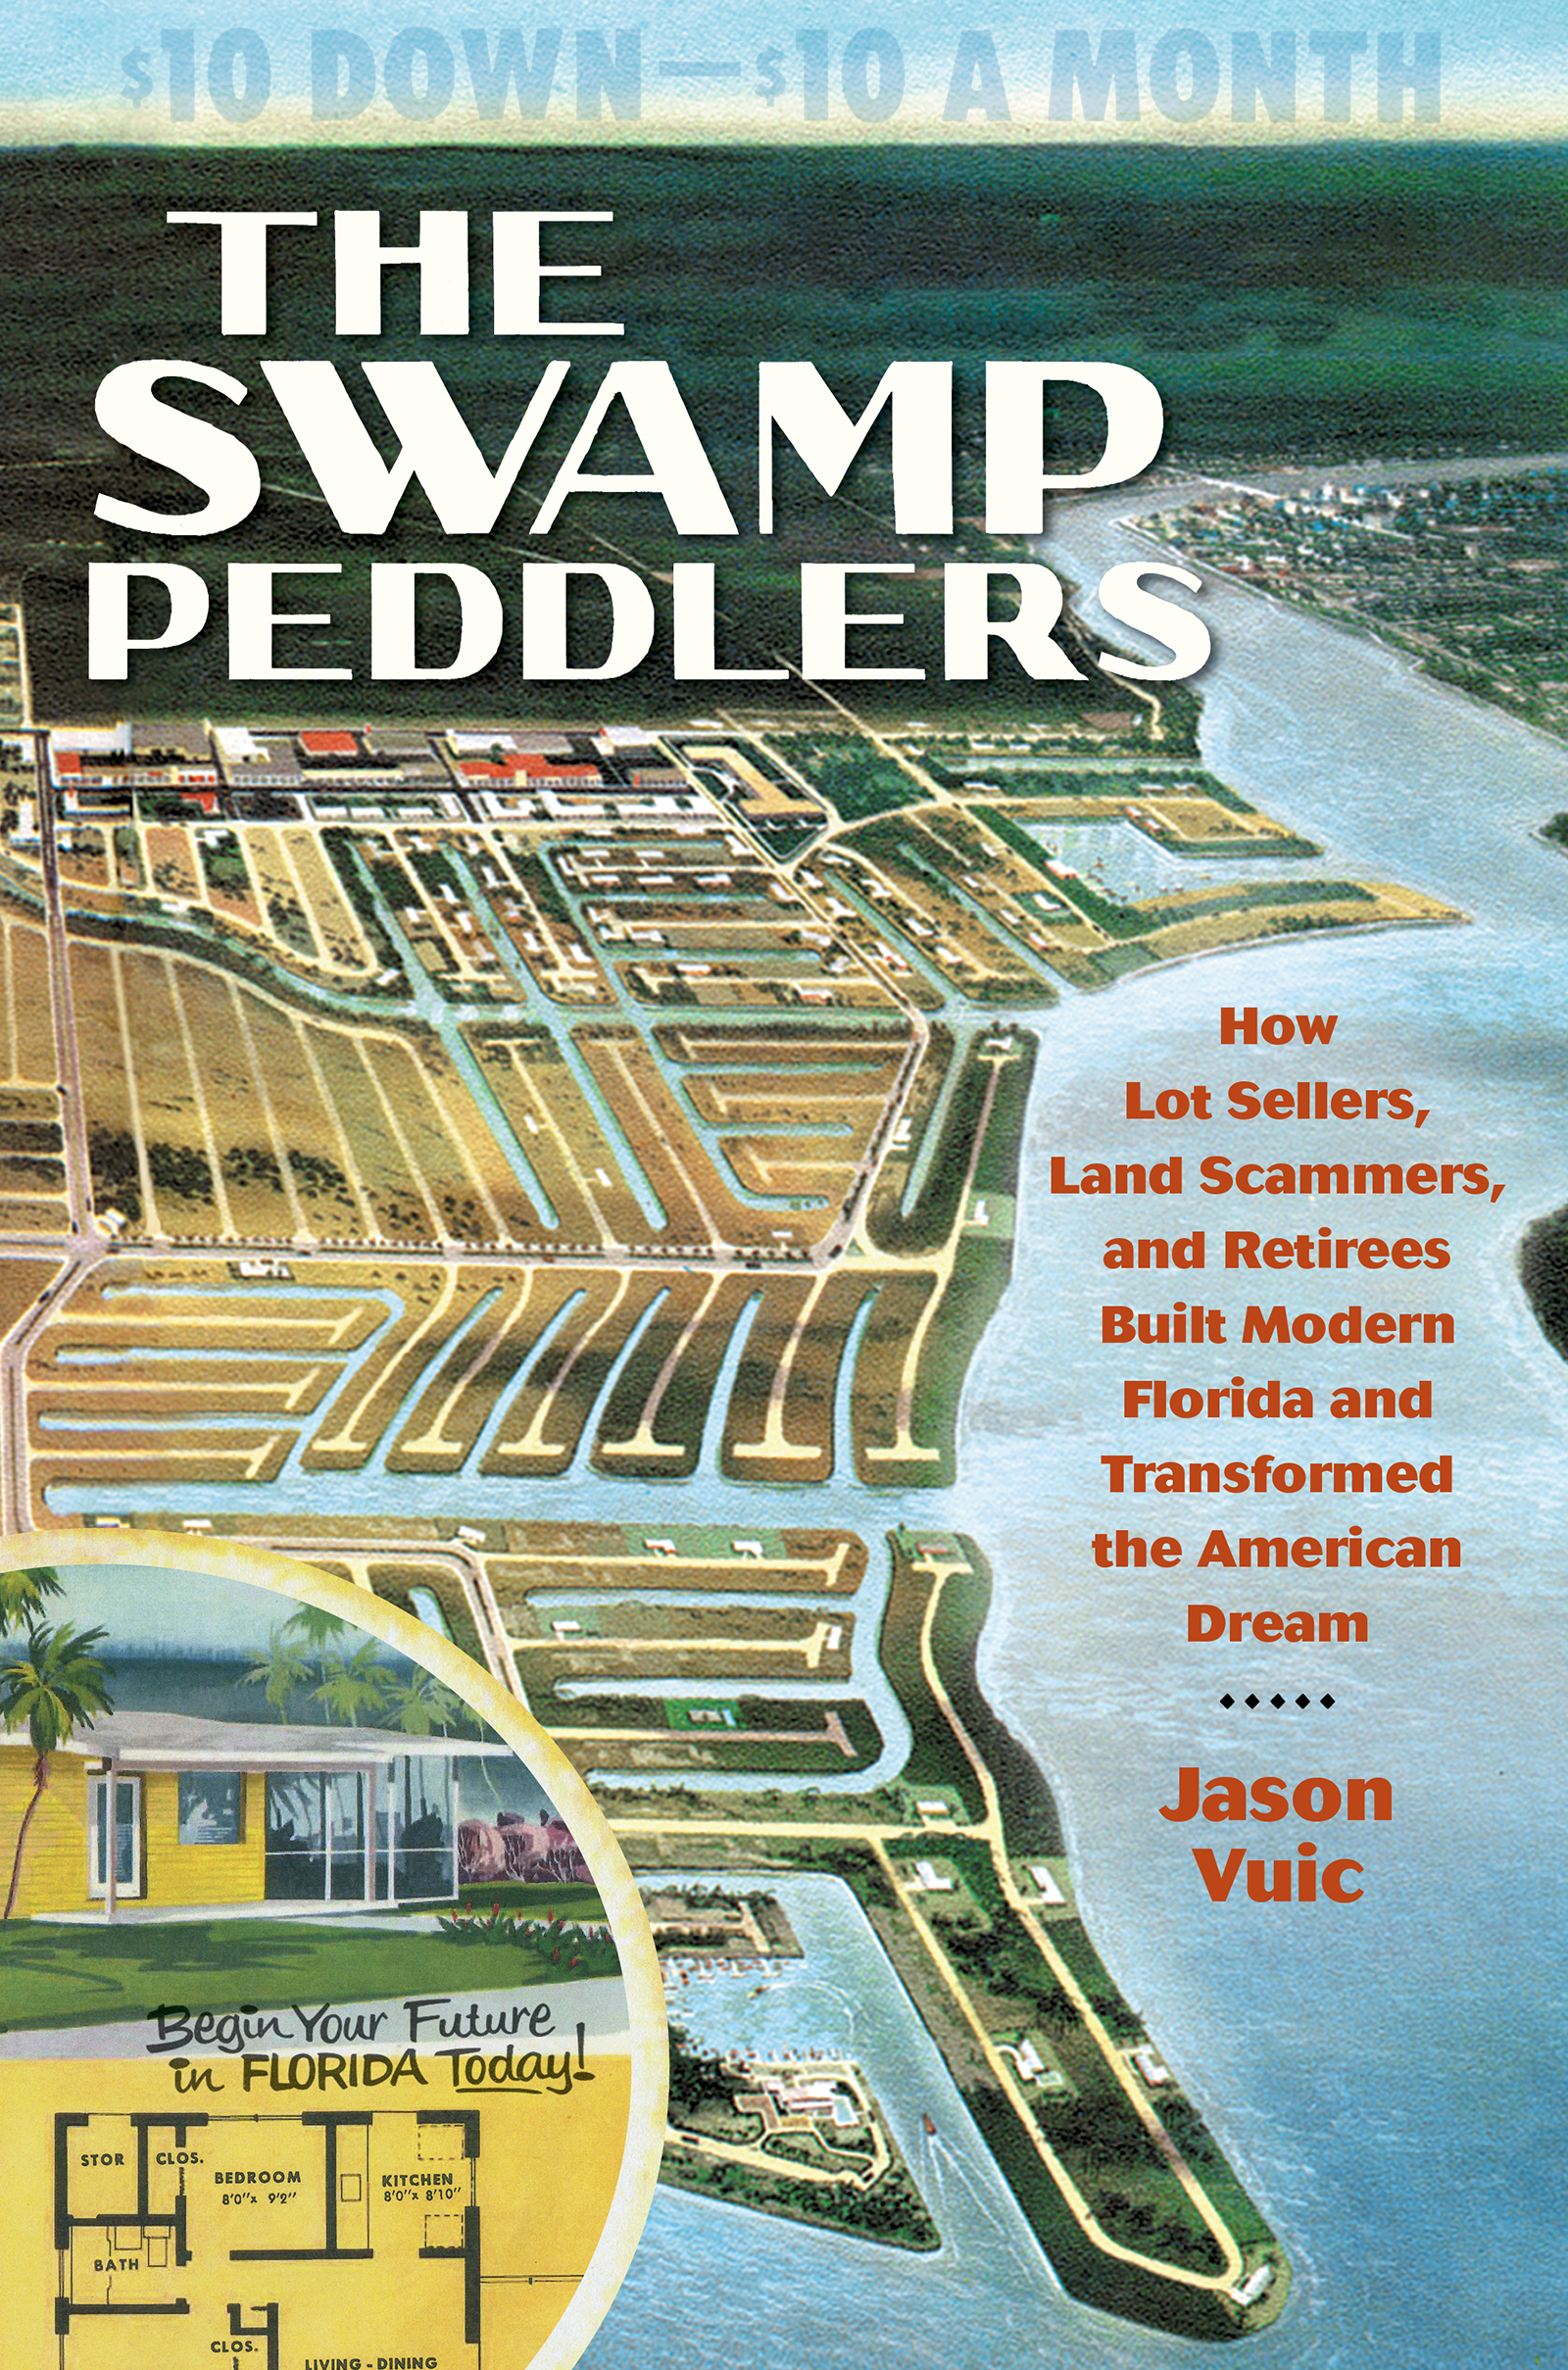 Imagen de portada para The Swamp Peddlers [electronic resource] : How Lot Sellers, Land Scammers, and Retirees Built Modern Florida and Transformed the American Dream